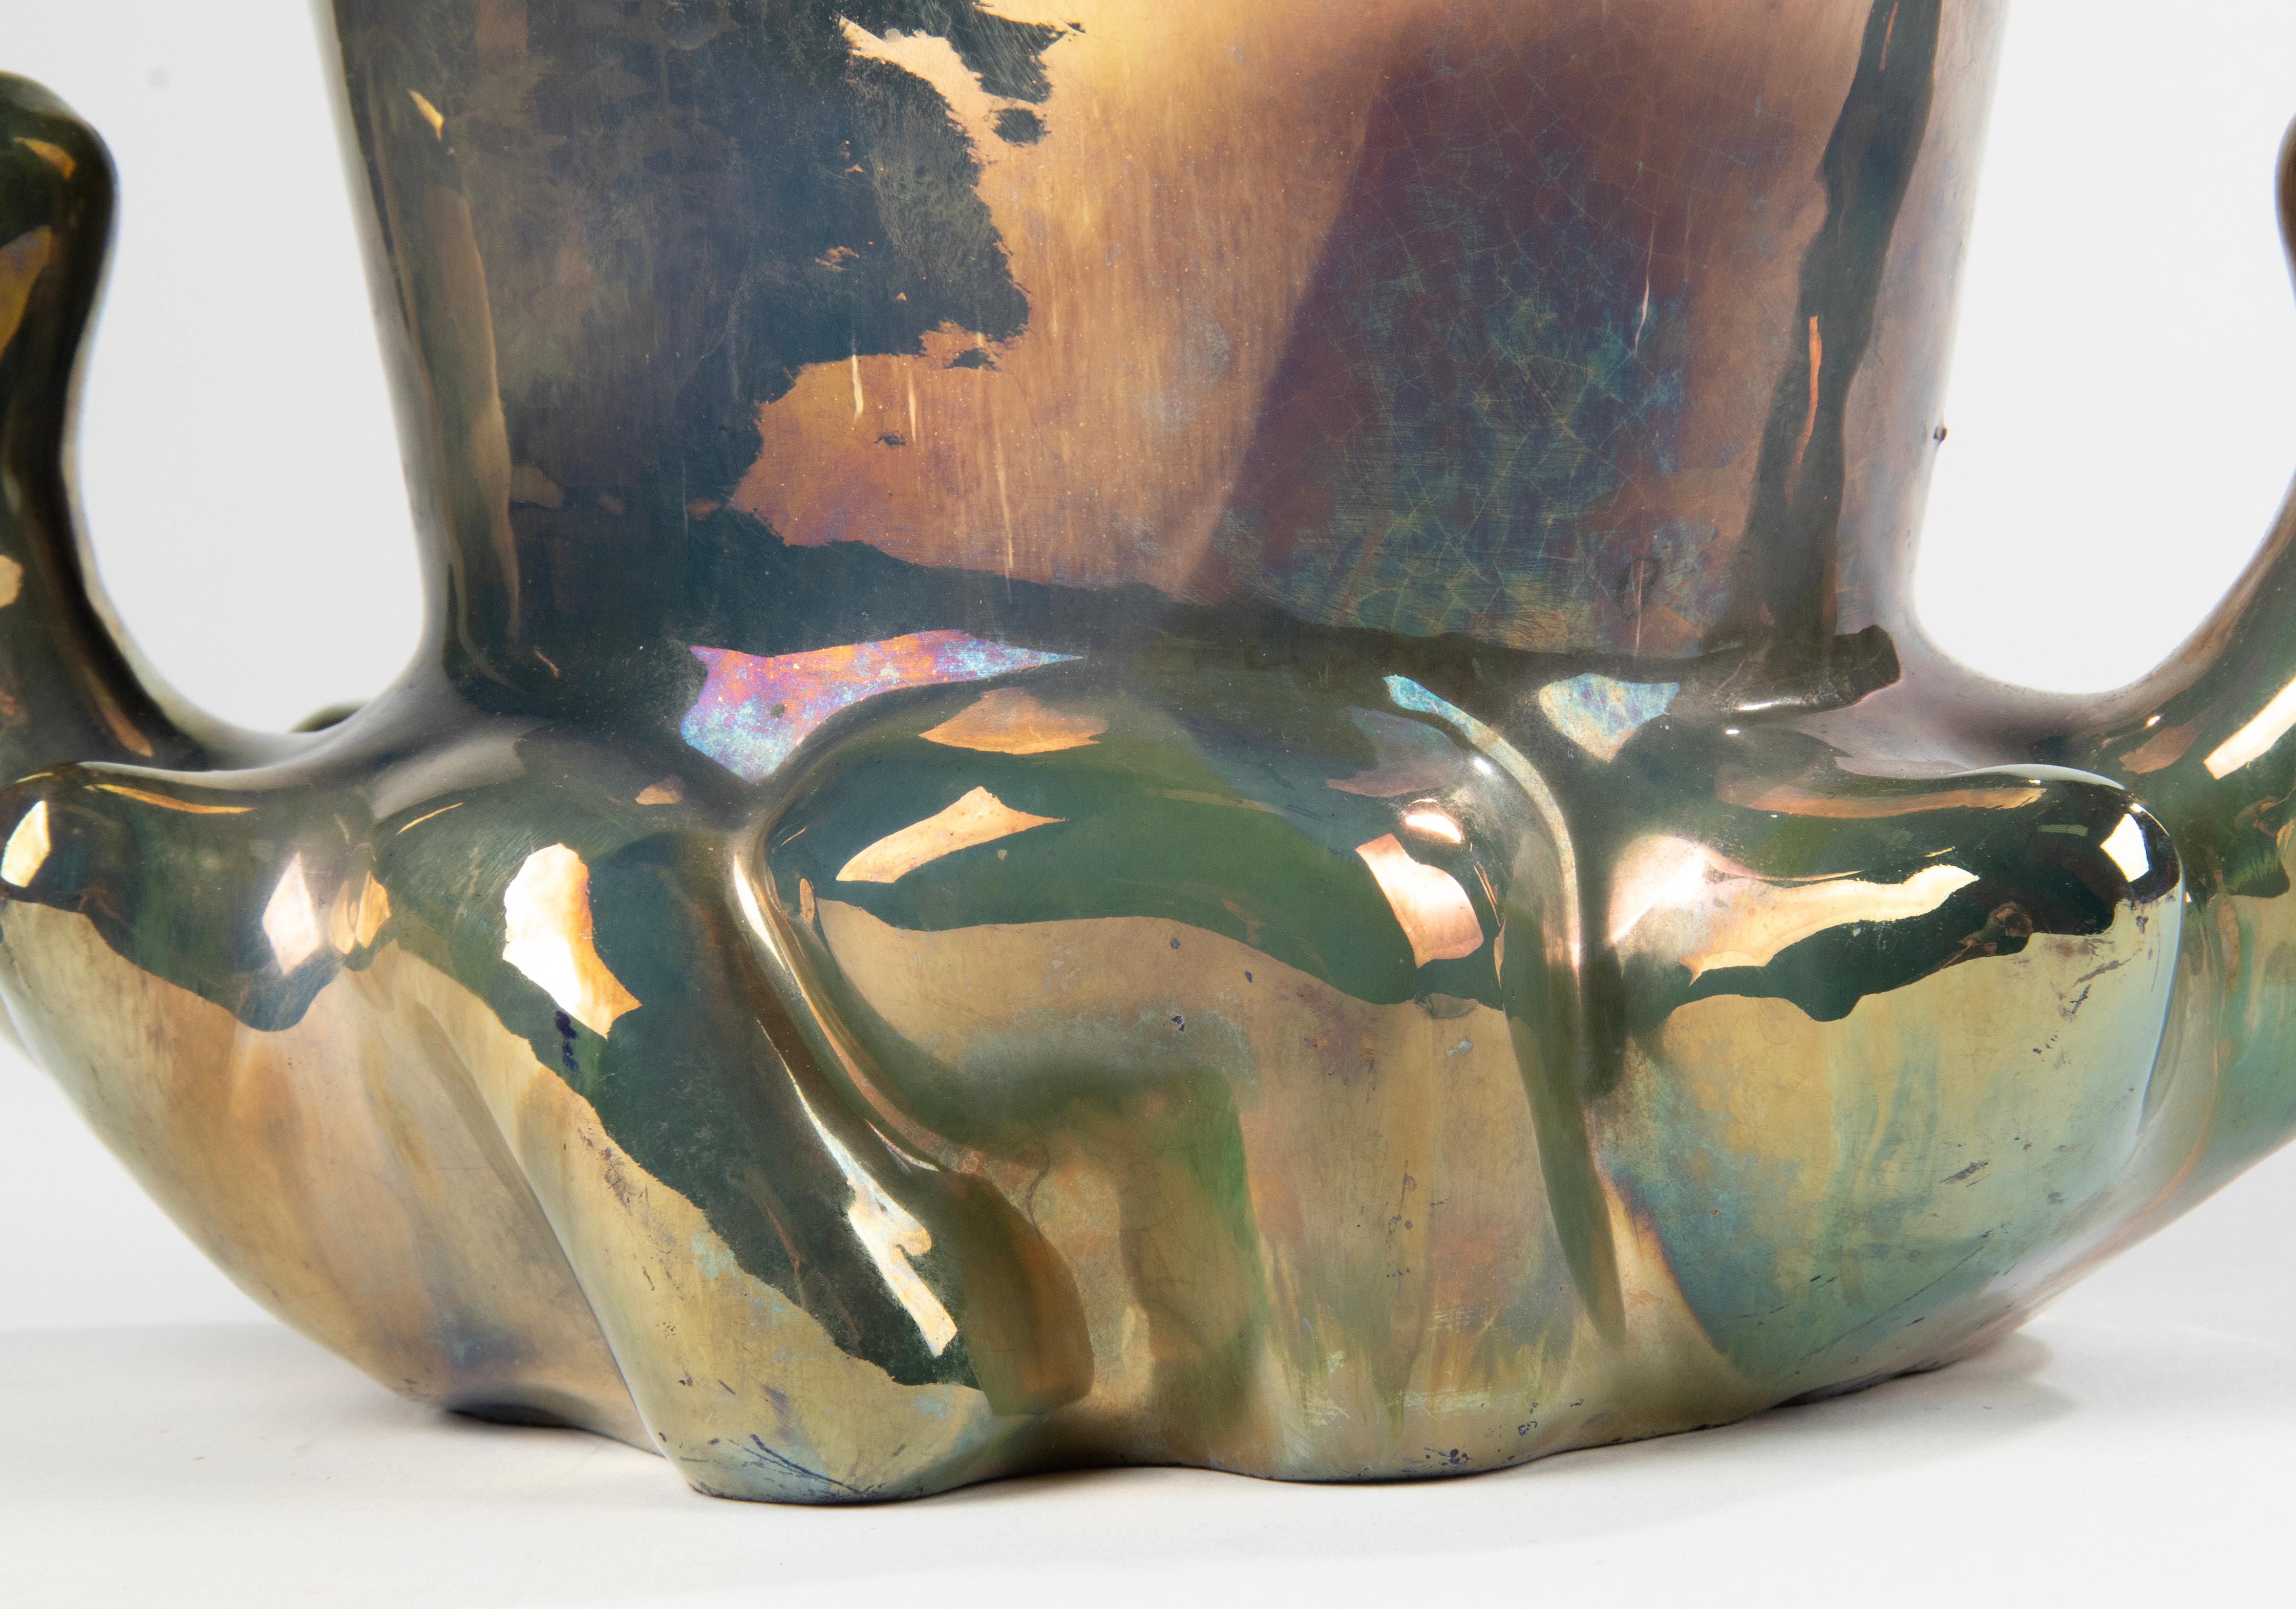 1930s Ceramic Art Deco Vase with Iridescent Glaze - Rambervilliers France For Sale 3